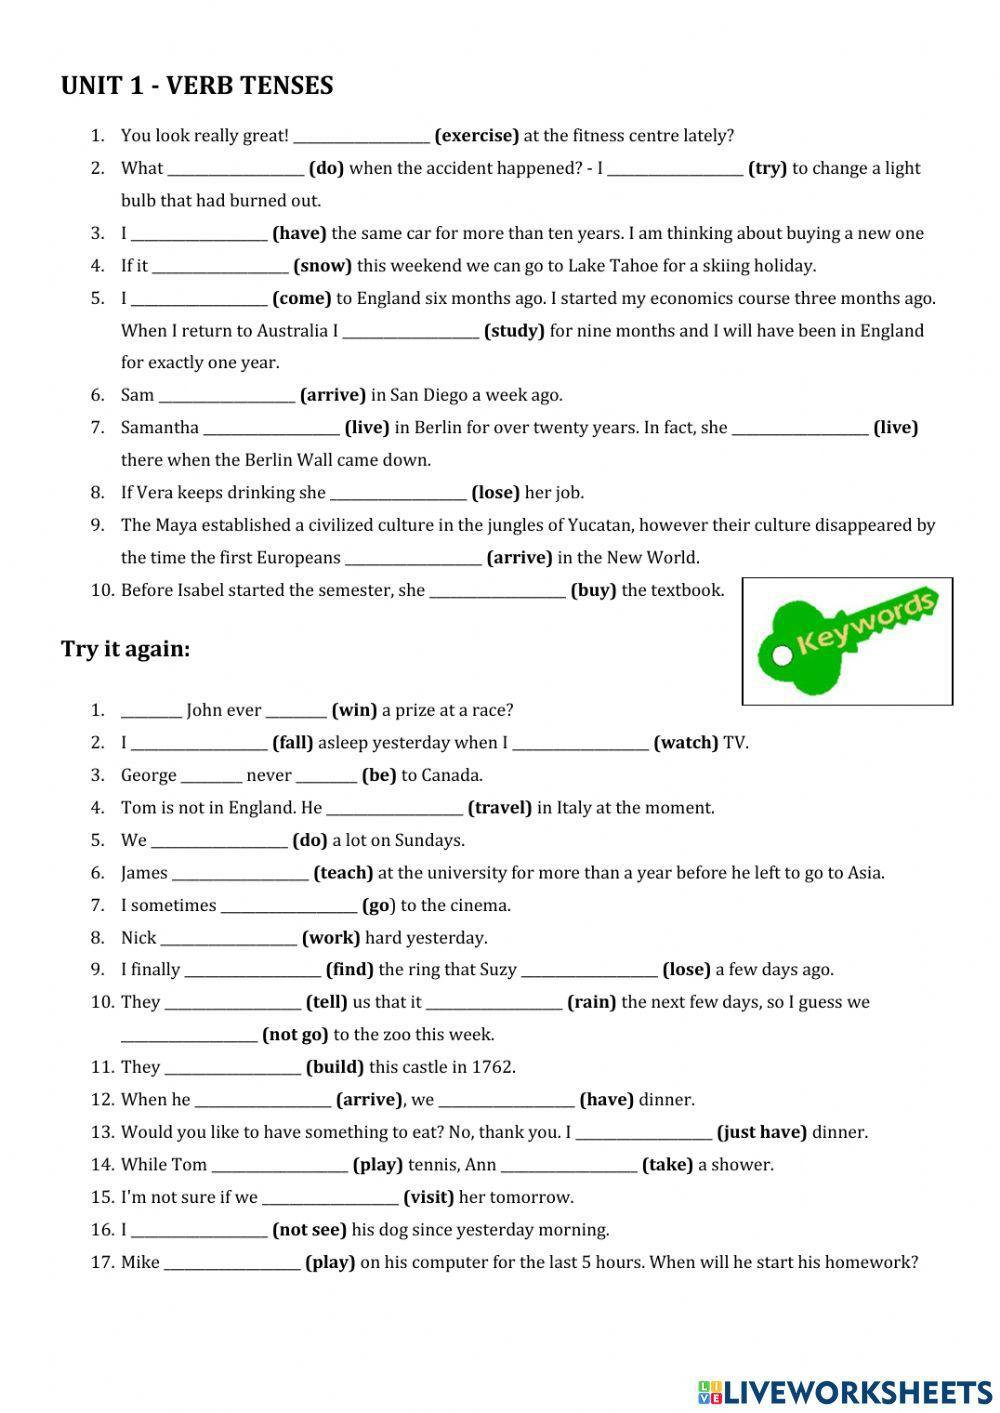 1a Mixed verb tenses worksheet | Live Worksheets